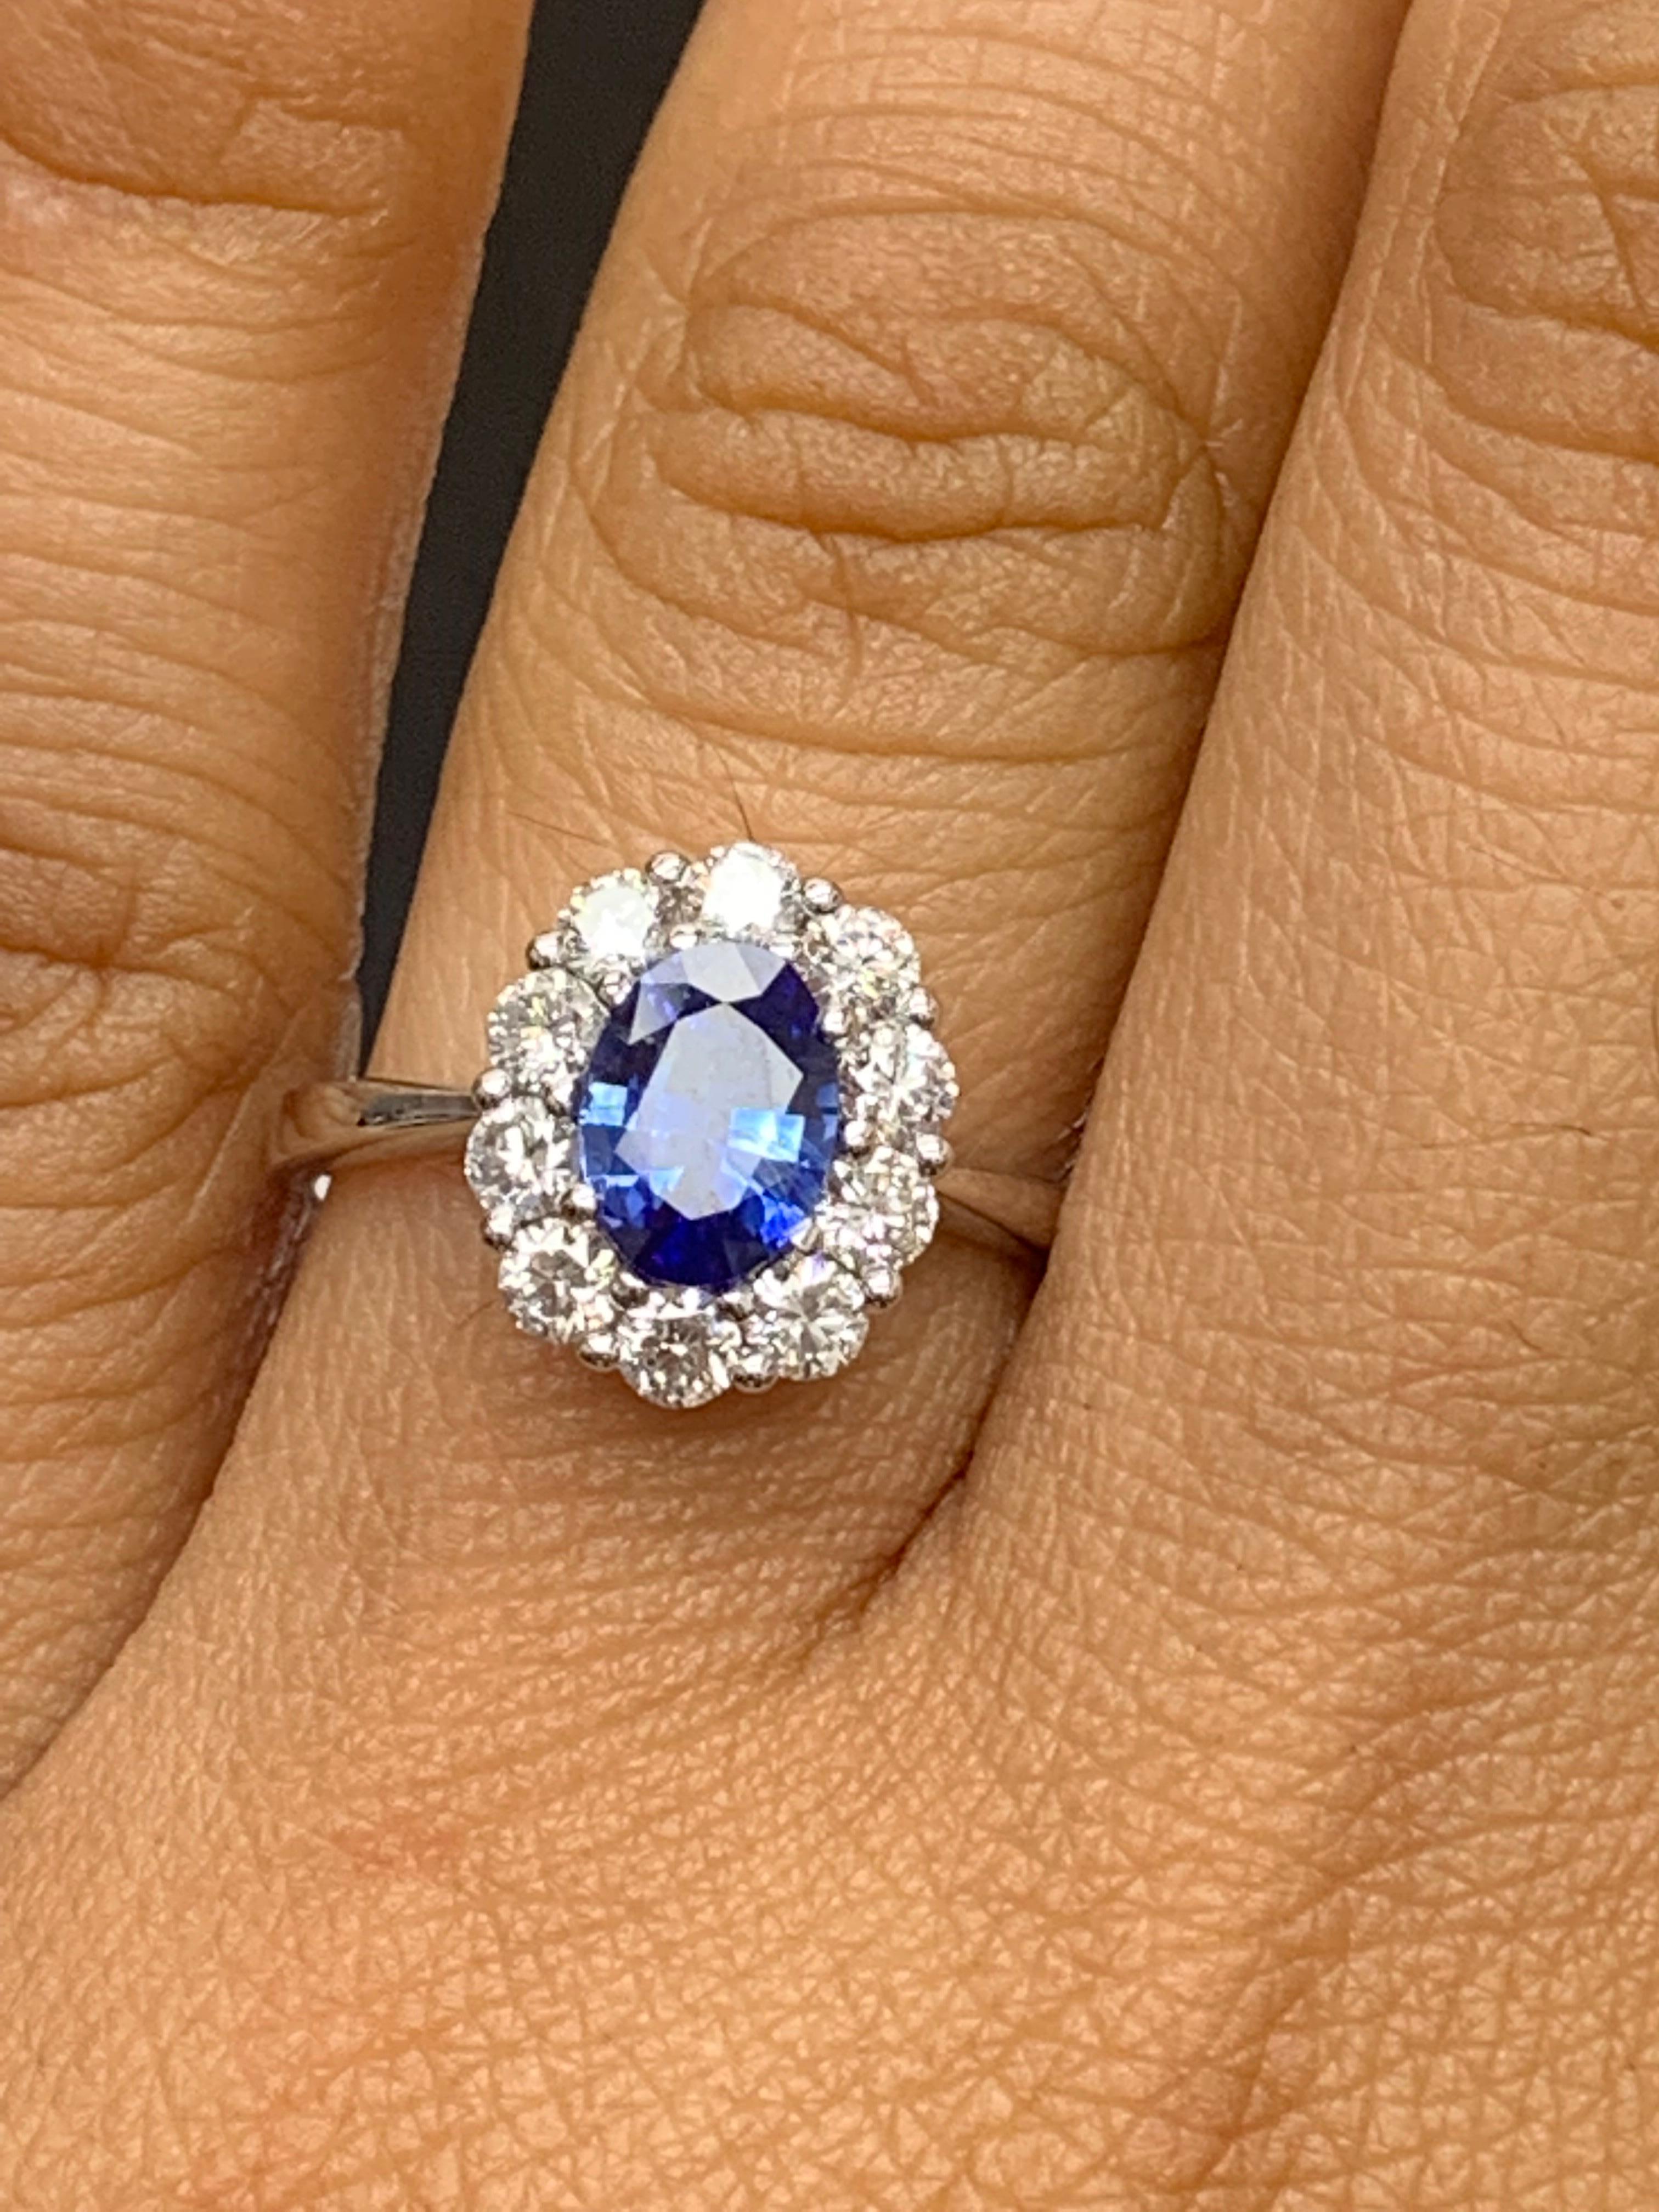 A simple floral motif ring showcasing a vibrant 0.87-carat oval cut blue sapphire, surrounded by 
0.74 carats of 10 accent round diamonds. Made in 18 karats white gold.

Style is available in different price ranges. Prices are based on your